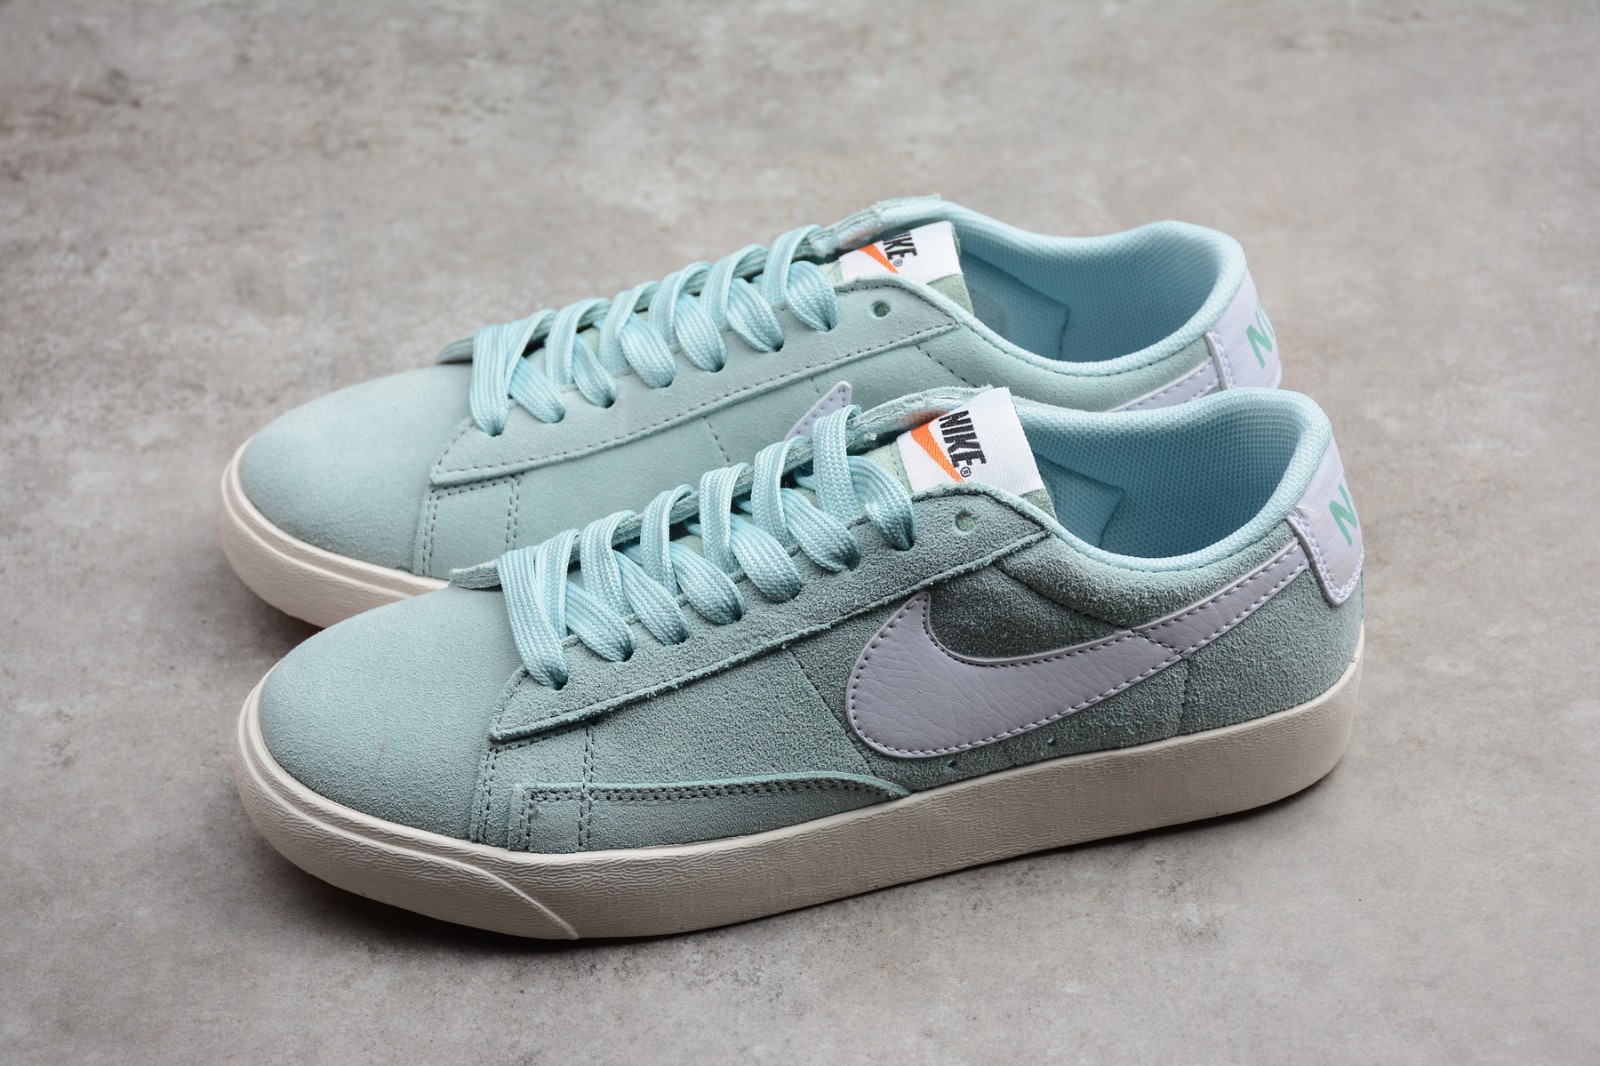 nike trail all mens boots shoes outlet - StclaircomoShops - Womens gift Nike Blazer Low SD Igloo Sail 301